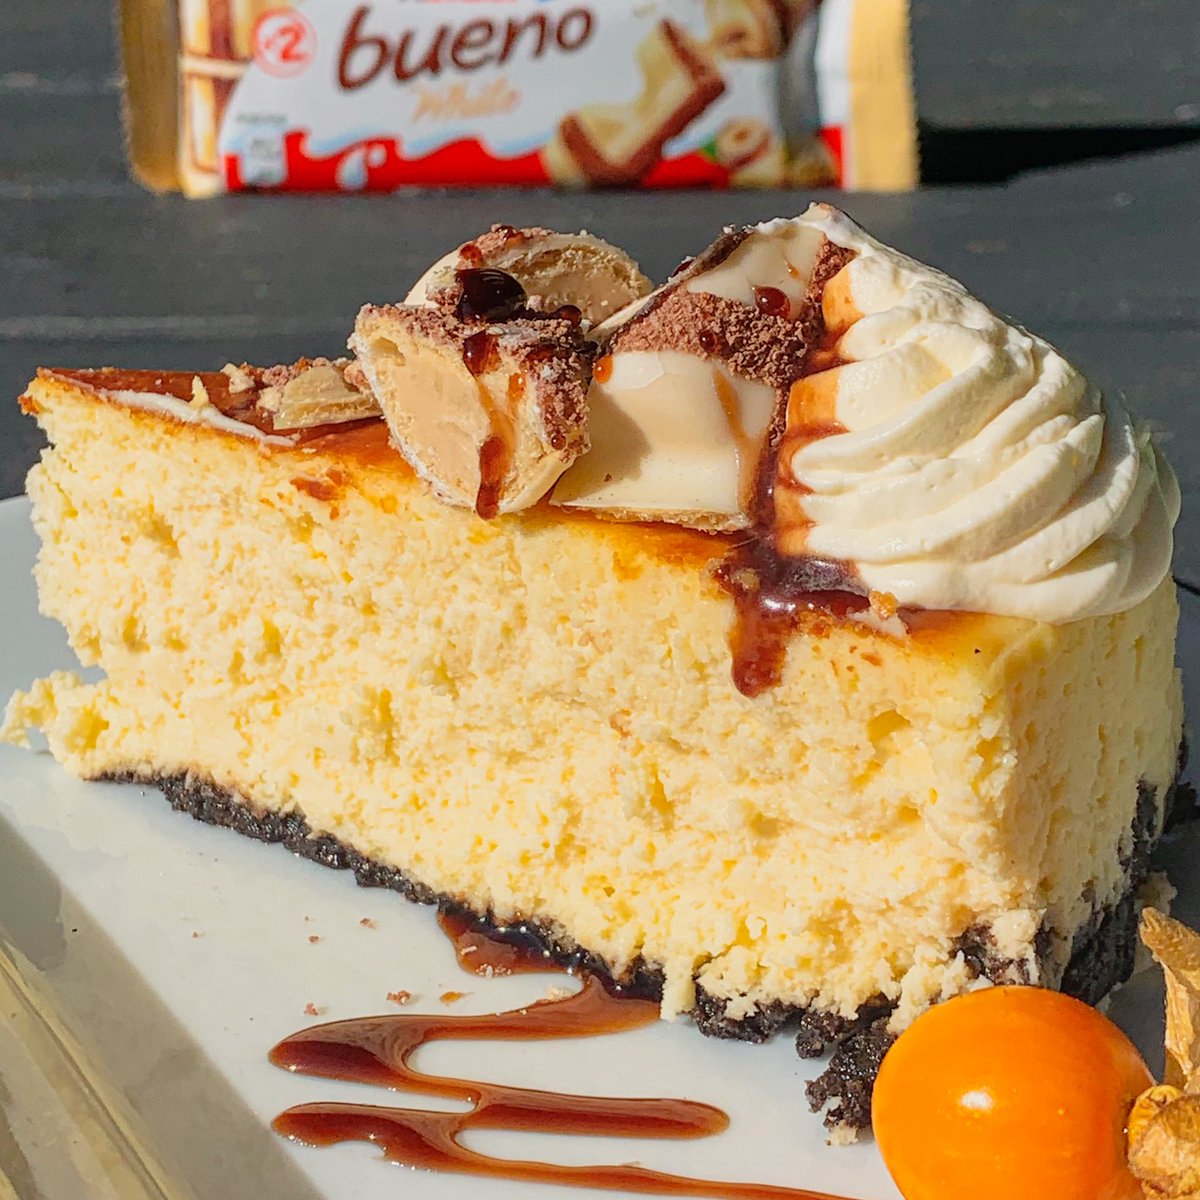 Now that’s what I call a Cheesecake 😍 Collection Slots still available to order at bit.ly/nscf14ta ♥️ ⭐️White Chocolate Bueno Cheesecake♥️ #cardifflife #igerscardiff #cardifffood #cardiff #cardiffblogger #cardifffoodiefan #supportlocal #cardiffbloggers #cardifffoodie